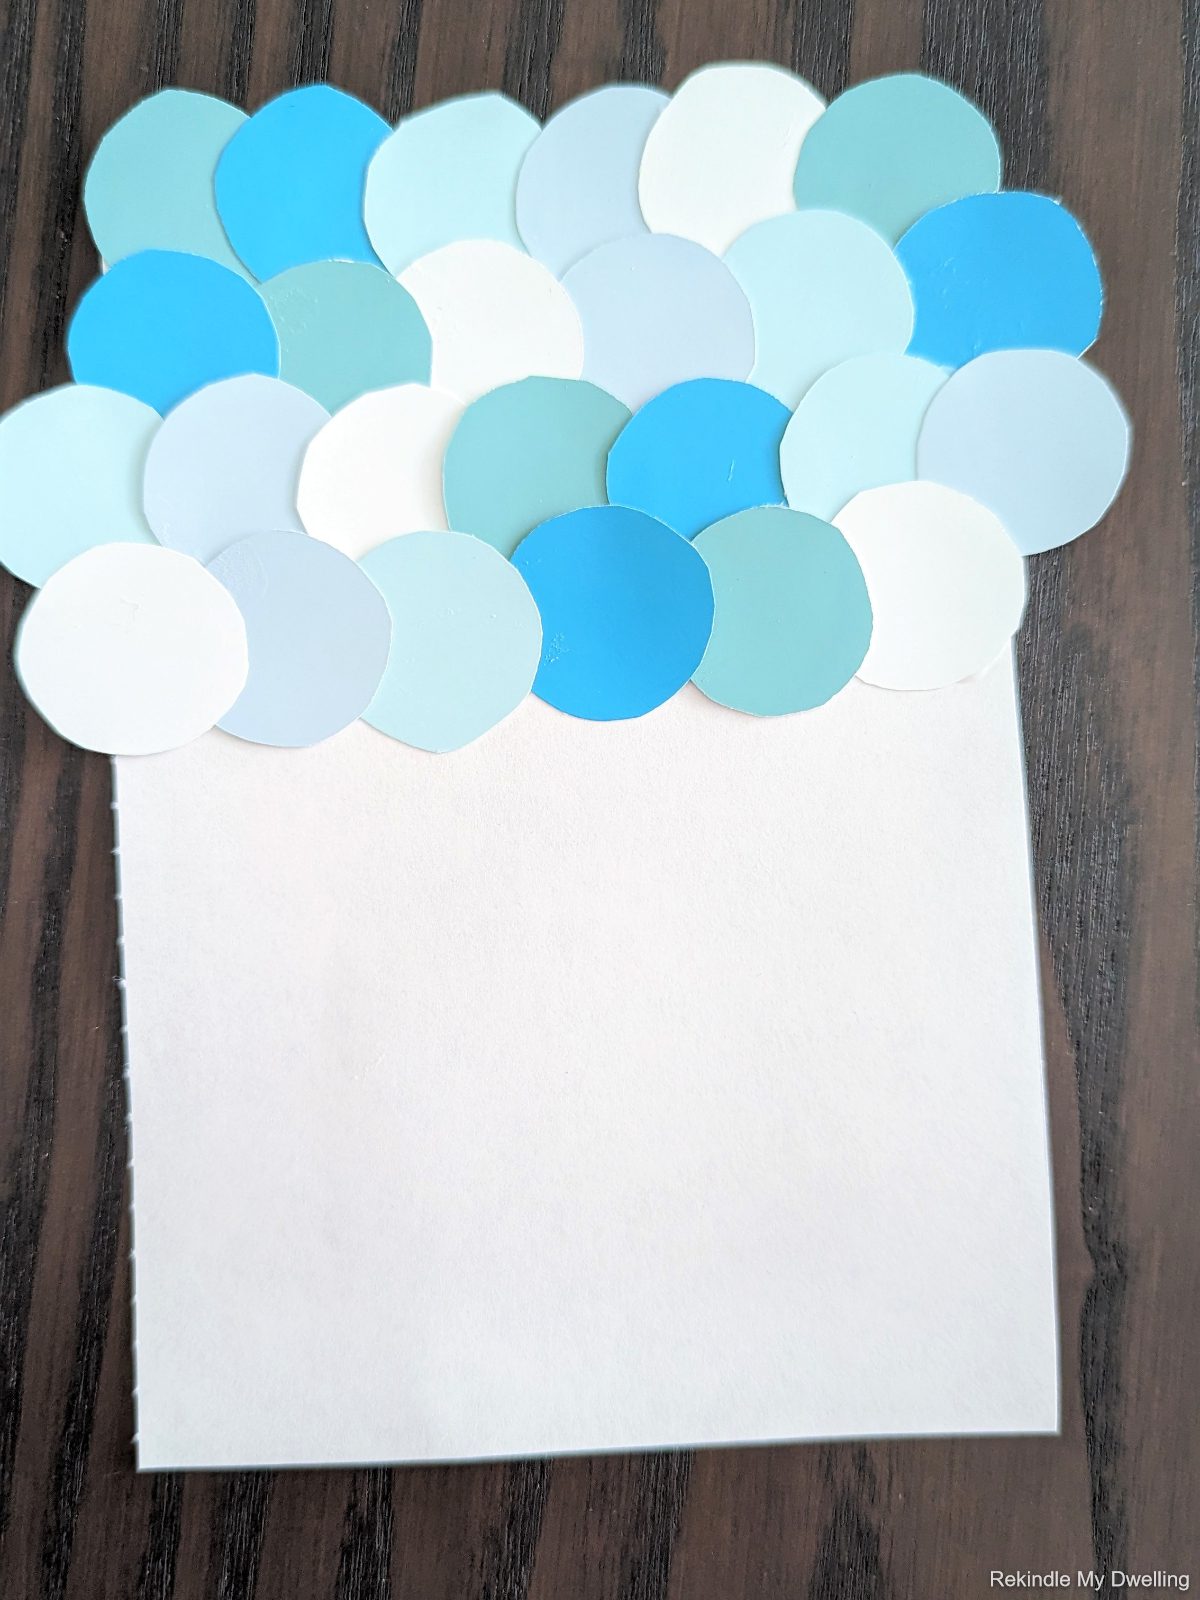 Paper circles glued onto a paper in layers.